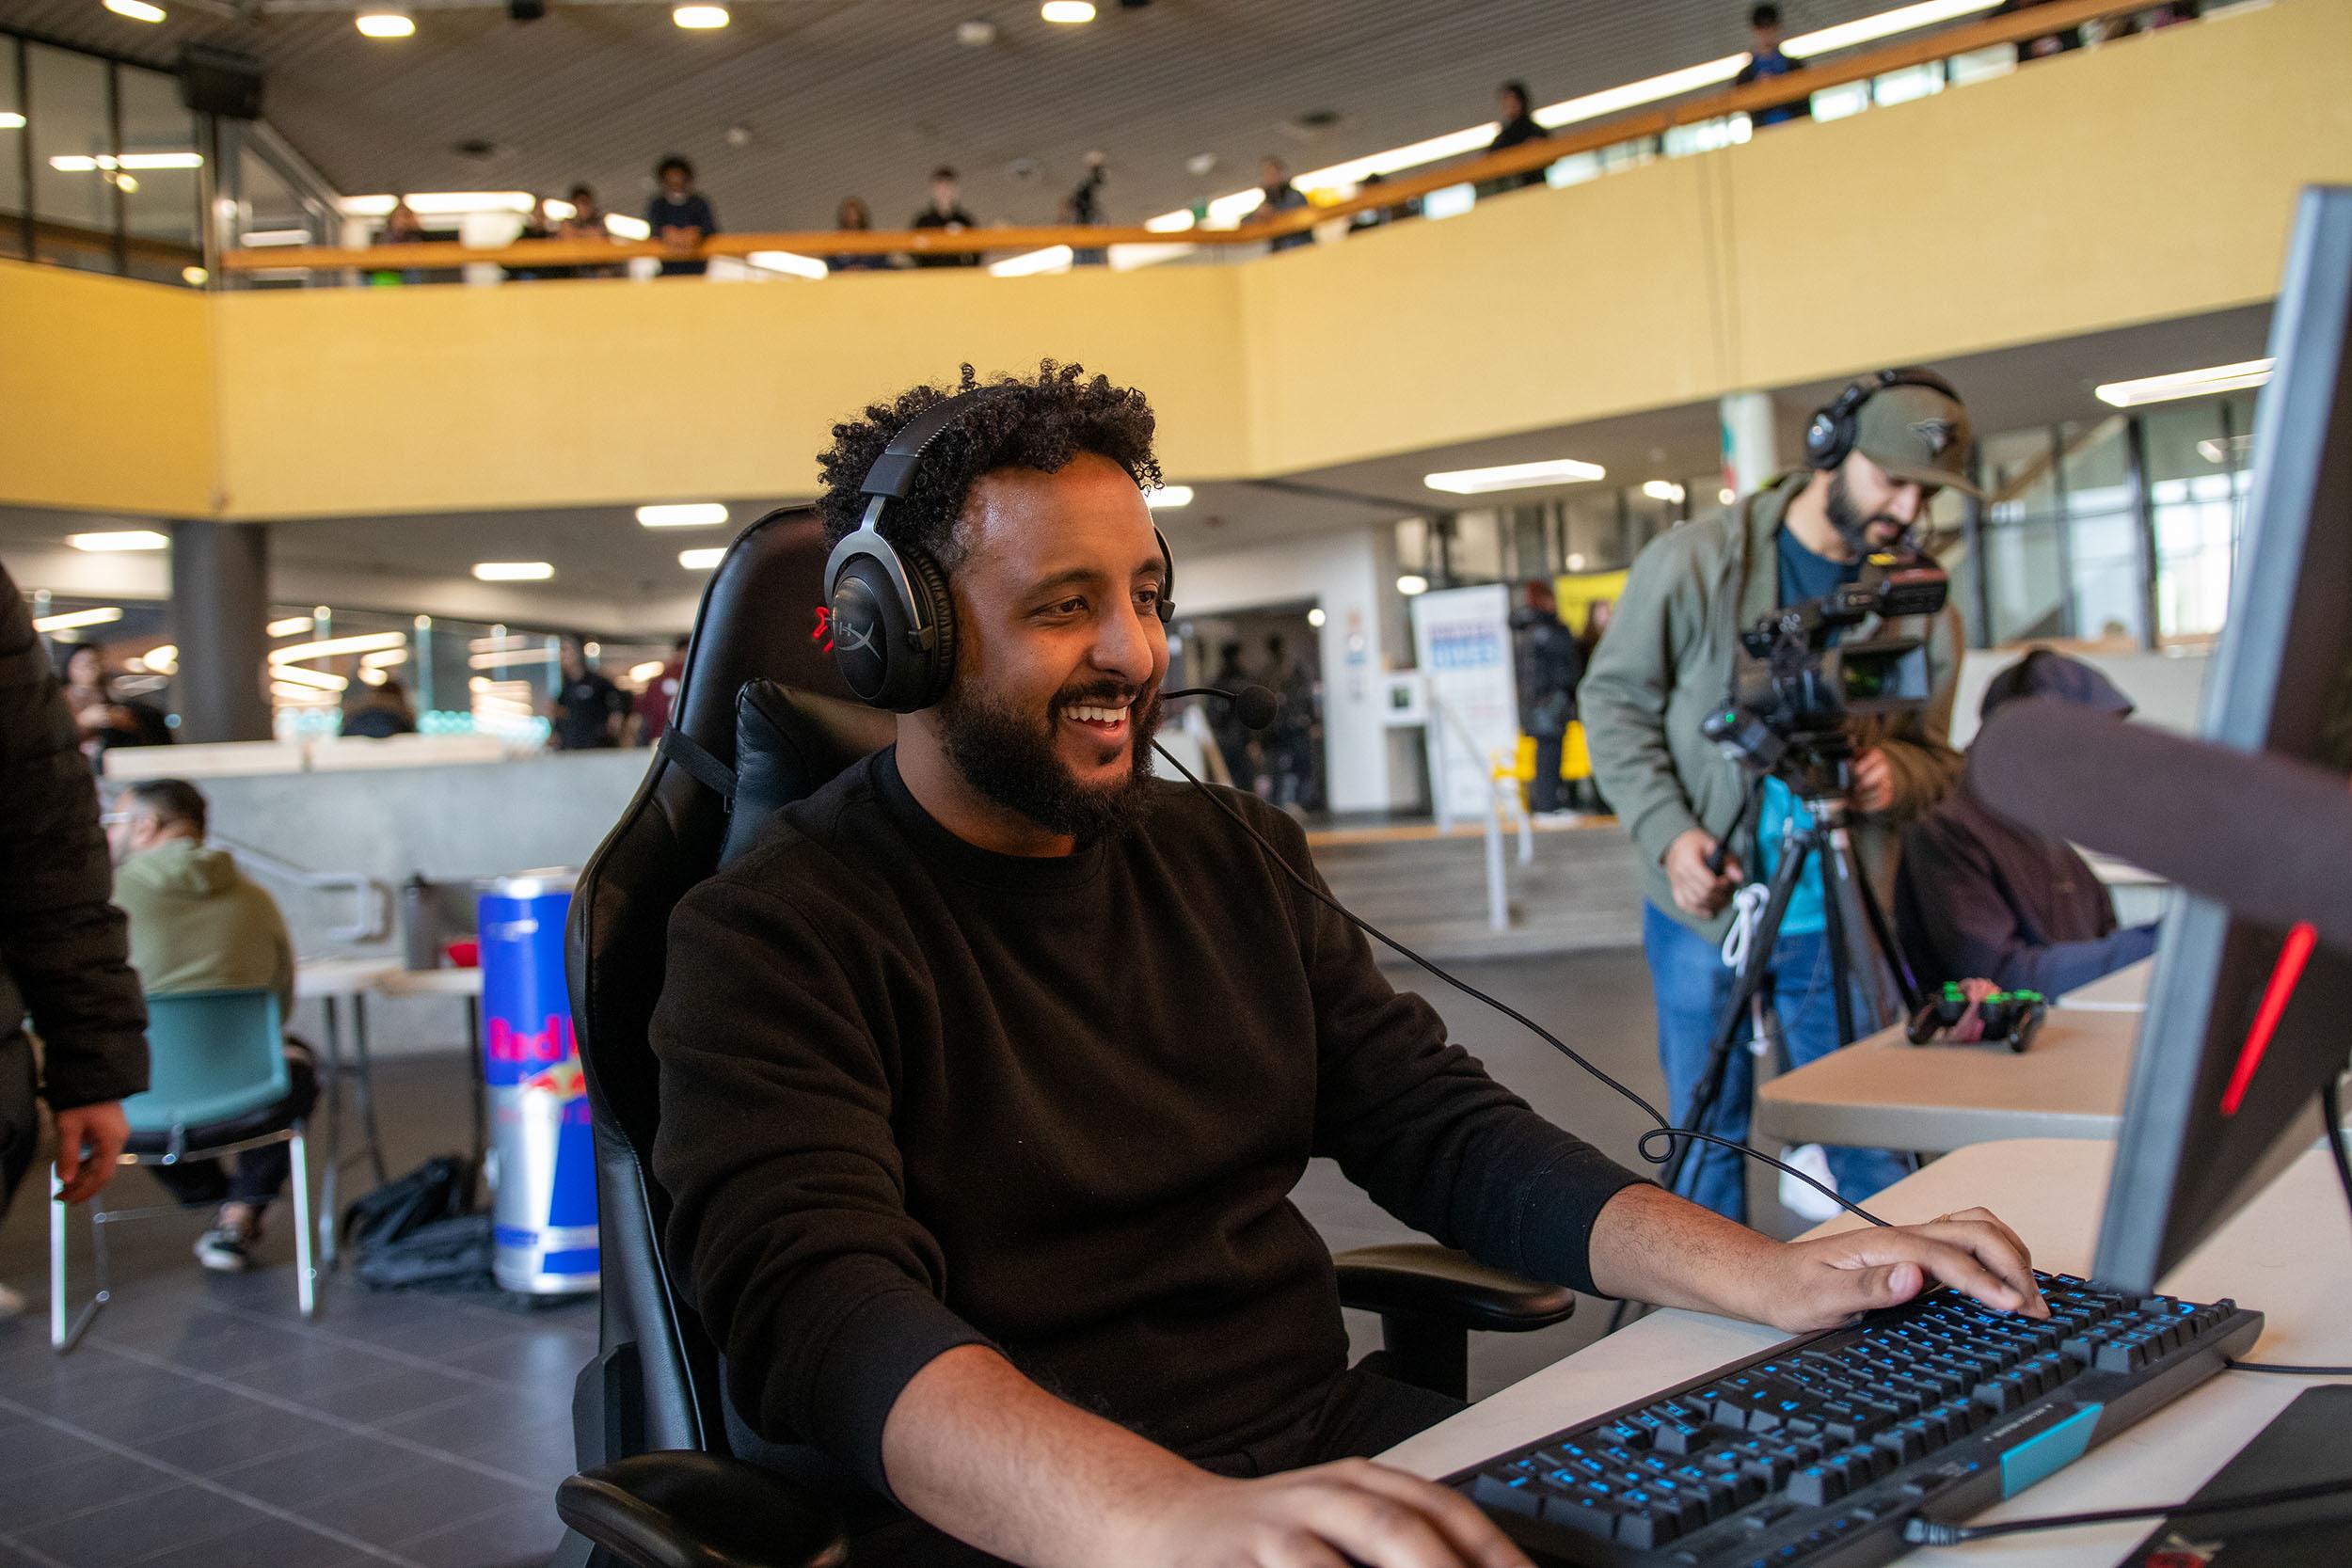 A smiling person wearing a headset sits at a computer with their hands on the keyboard.